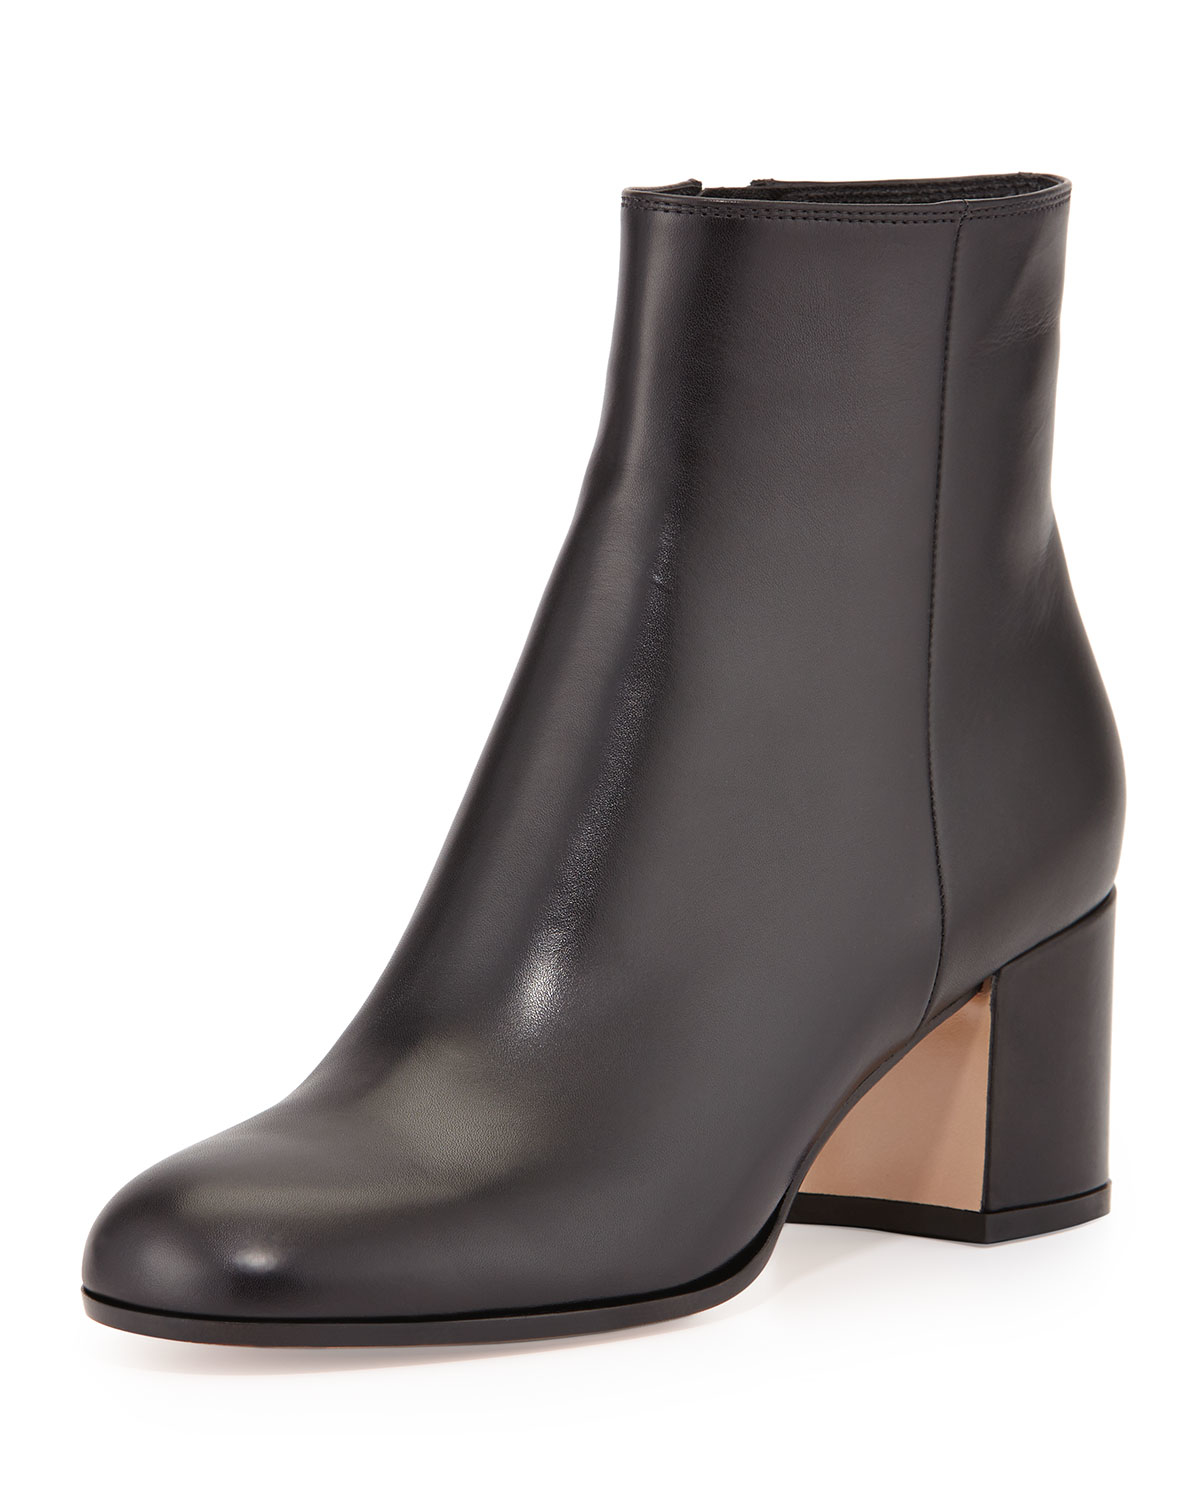 Gianvito rossi Vitello Leather Ankle Boots in Black | Lyst